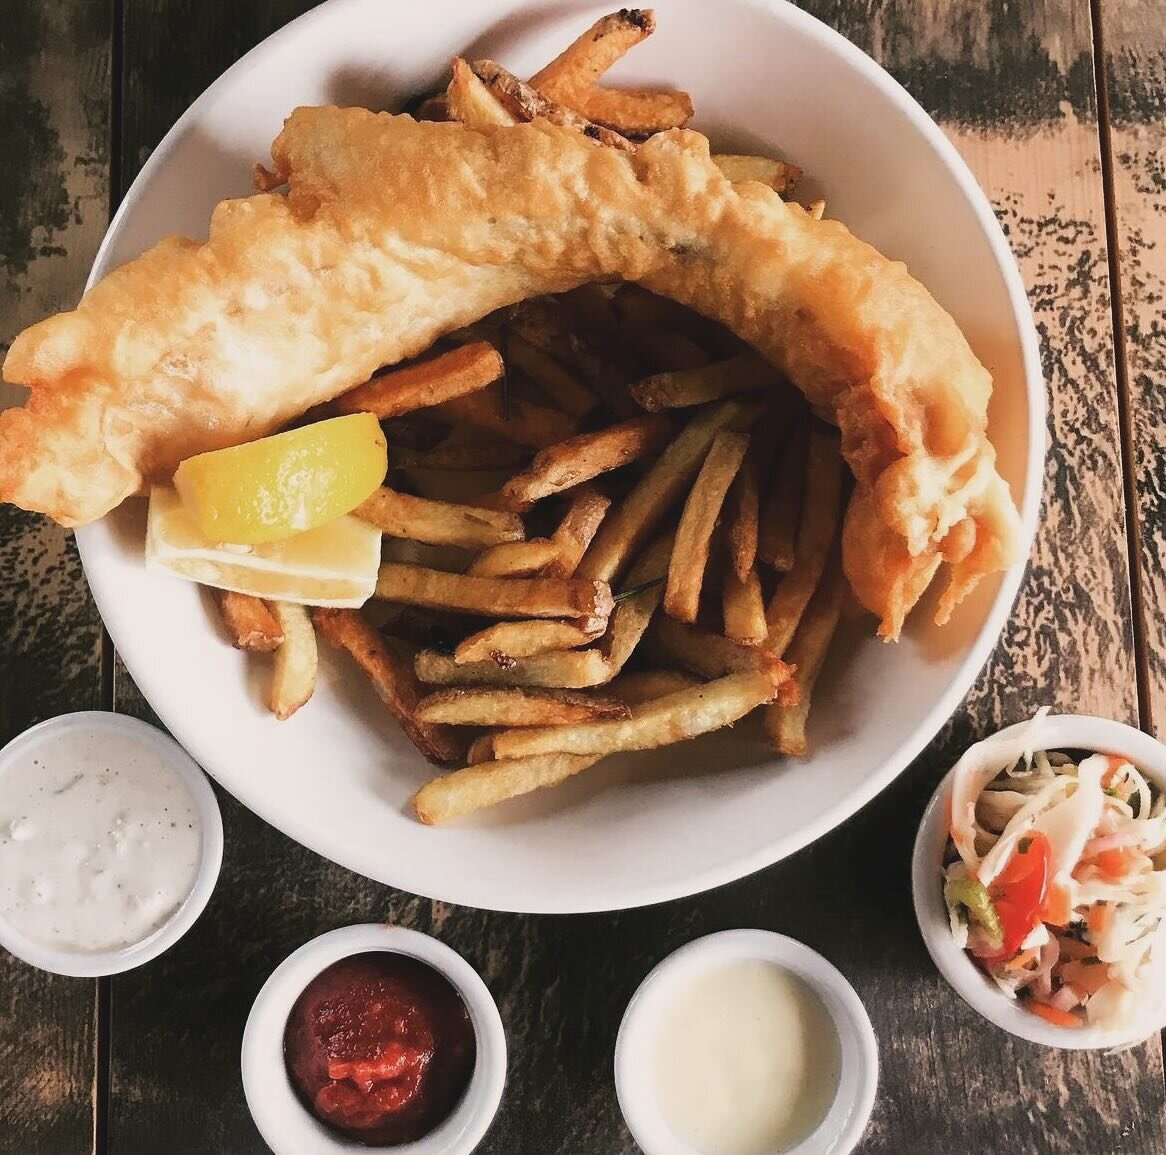 Fish Fry Friday! 🐟🍟 Catch ya 5PM-9PM for dine in or takeout! 🎣

Tempura battered North Atlantic cod, tangy slaw, house cut rosemary &amp; garlic fries with house made tartar, cocktail &amp; garlic aioli for dipping!

#glutenfree #fishfry #goodfrid